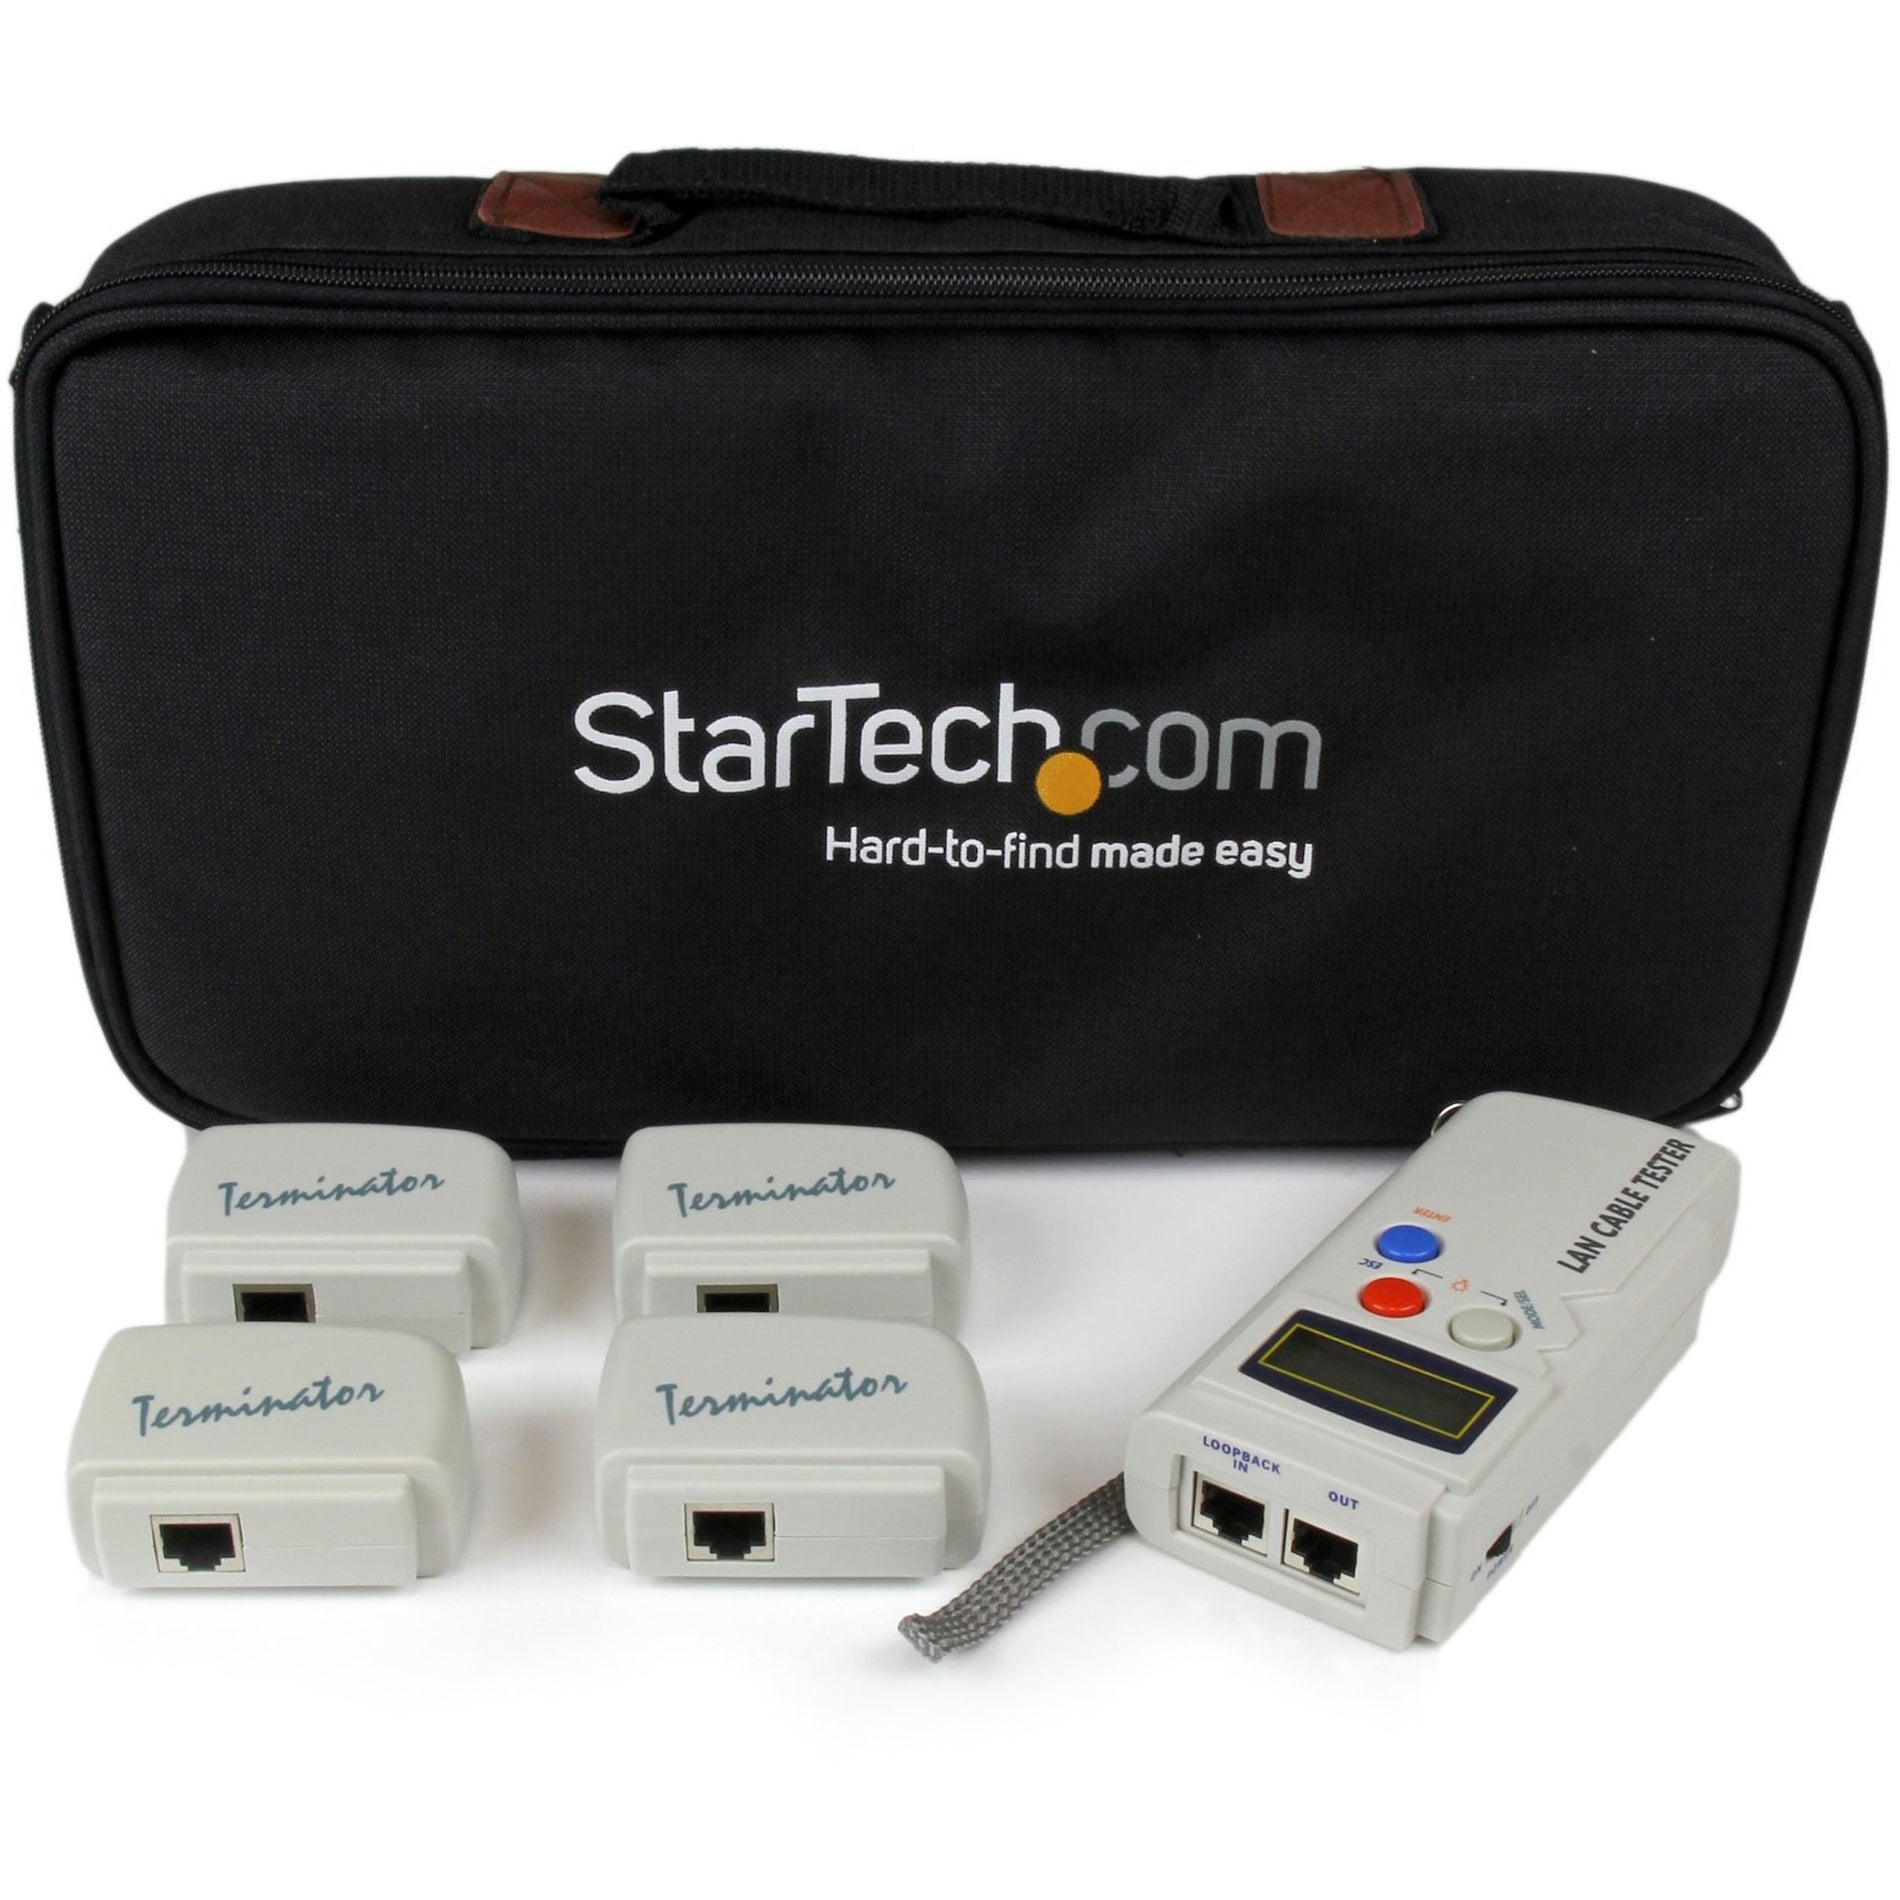 StarTech.com LANTESTPRO Professional RJ45 Network Cable Tester with 4 Remote Loopback Plugs, 2 Year Warranty, TAA Compliant